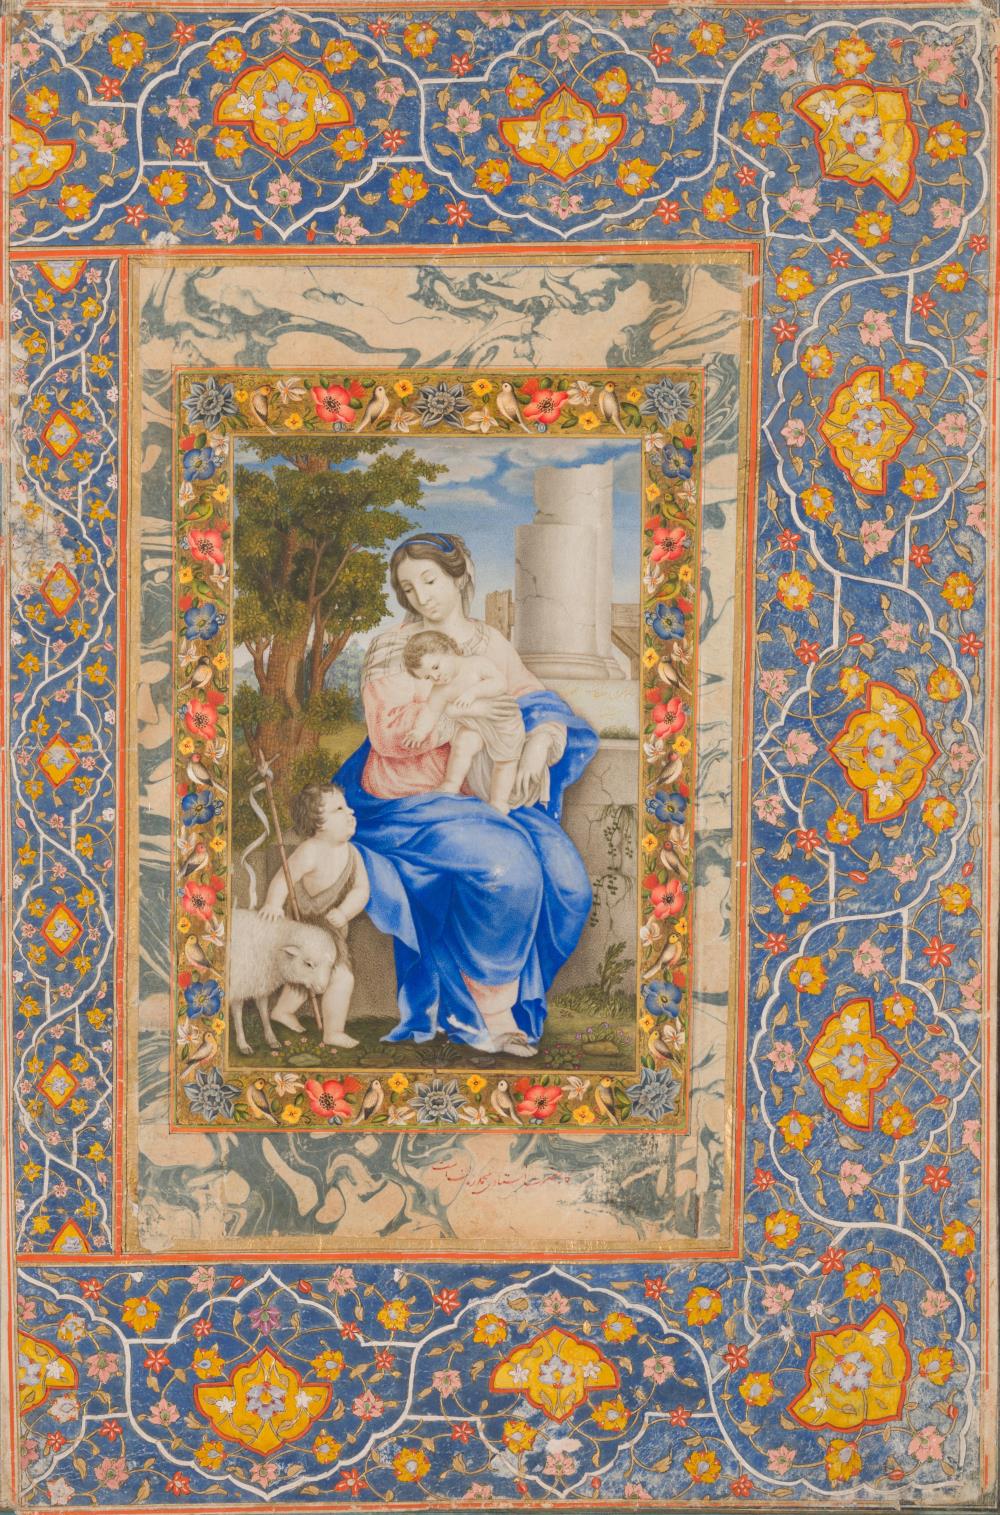 Virgin and Child with John the Baptist